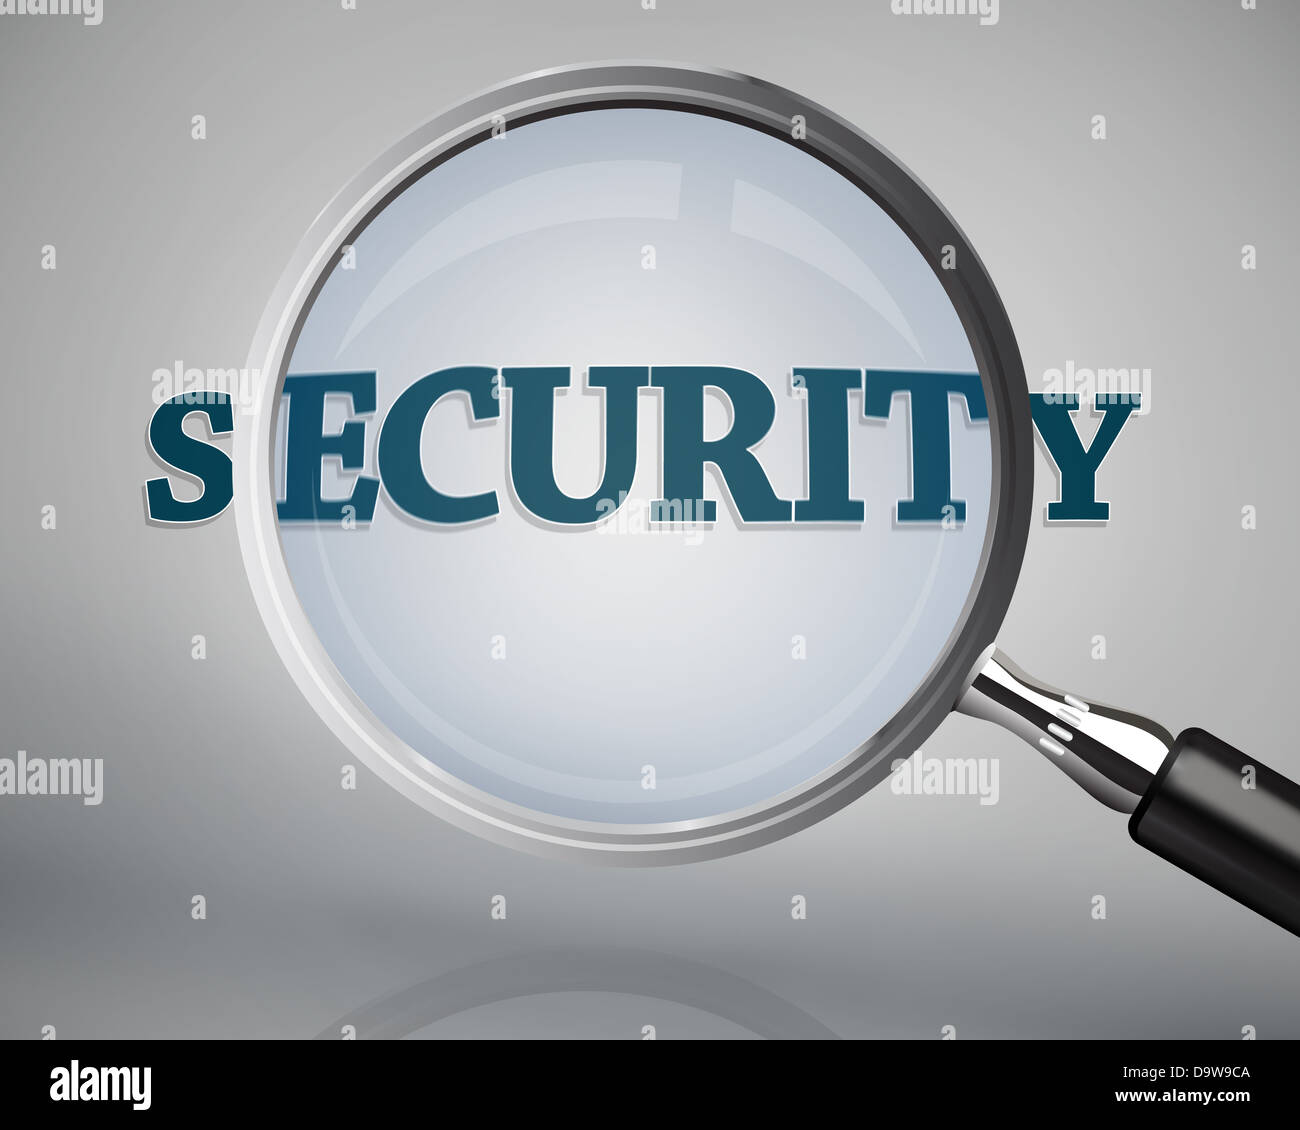 Magnifying glass showing security word Stock Photo